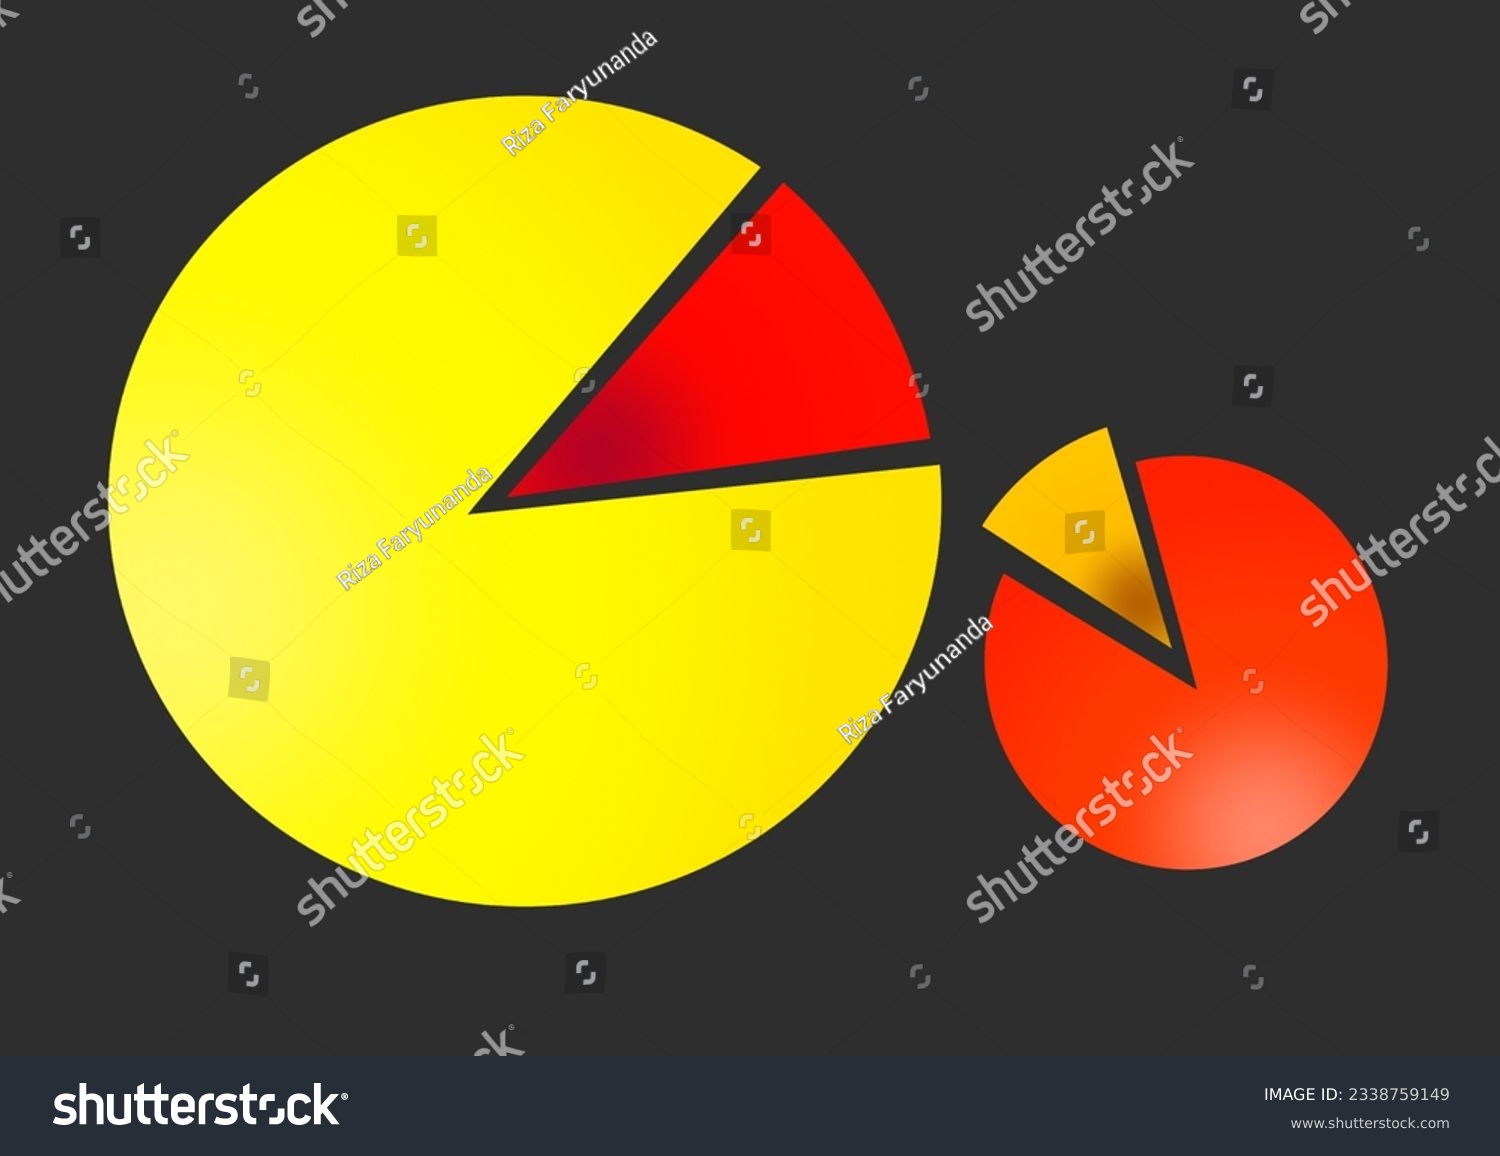 SVG of circular chart cropped on a dark background svg